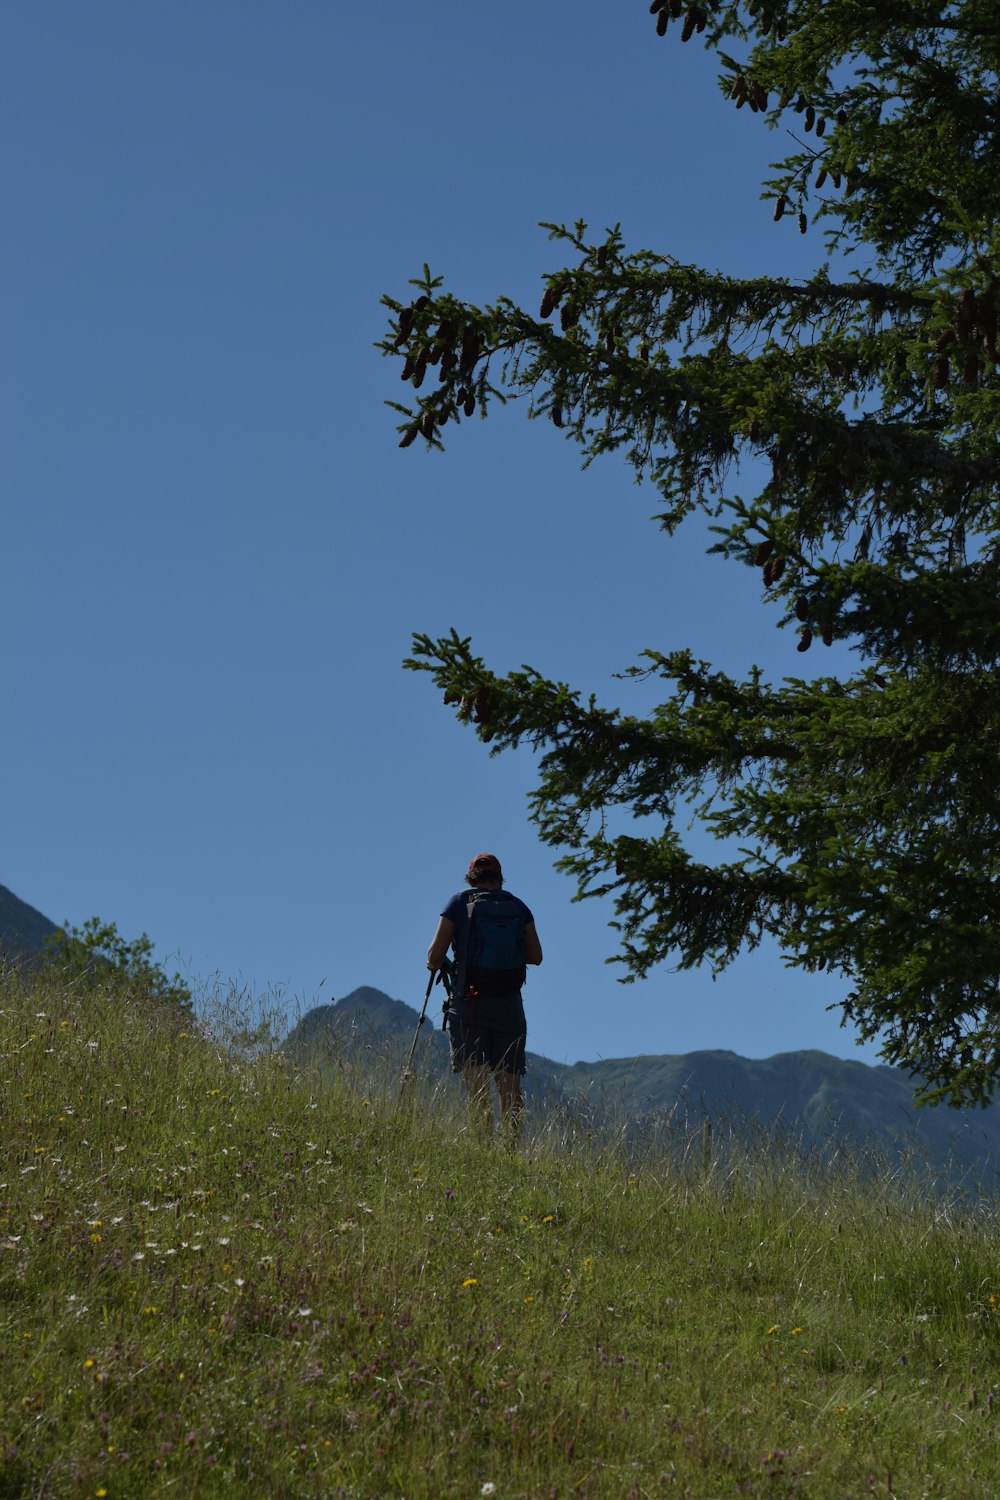 a person walking on a grassy hill